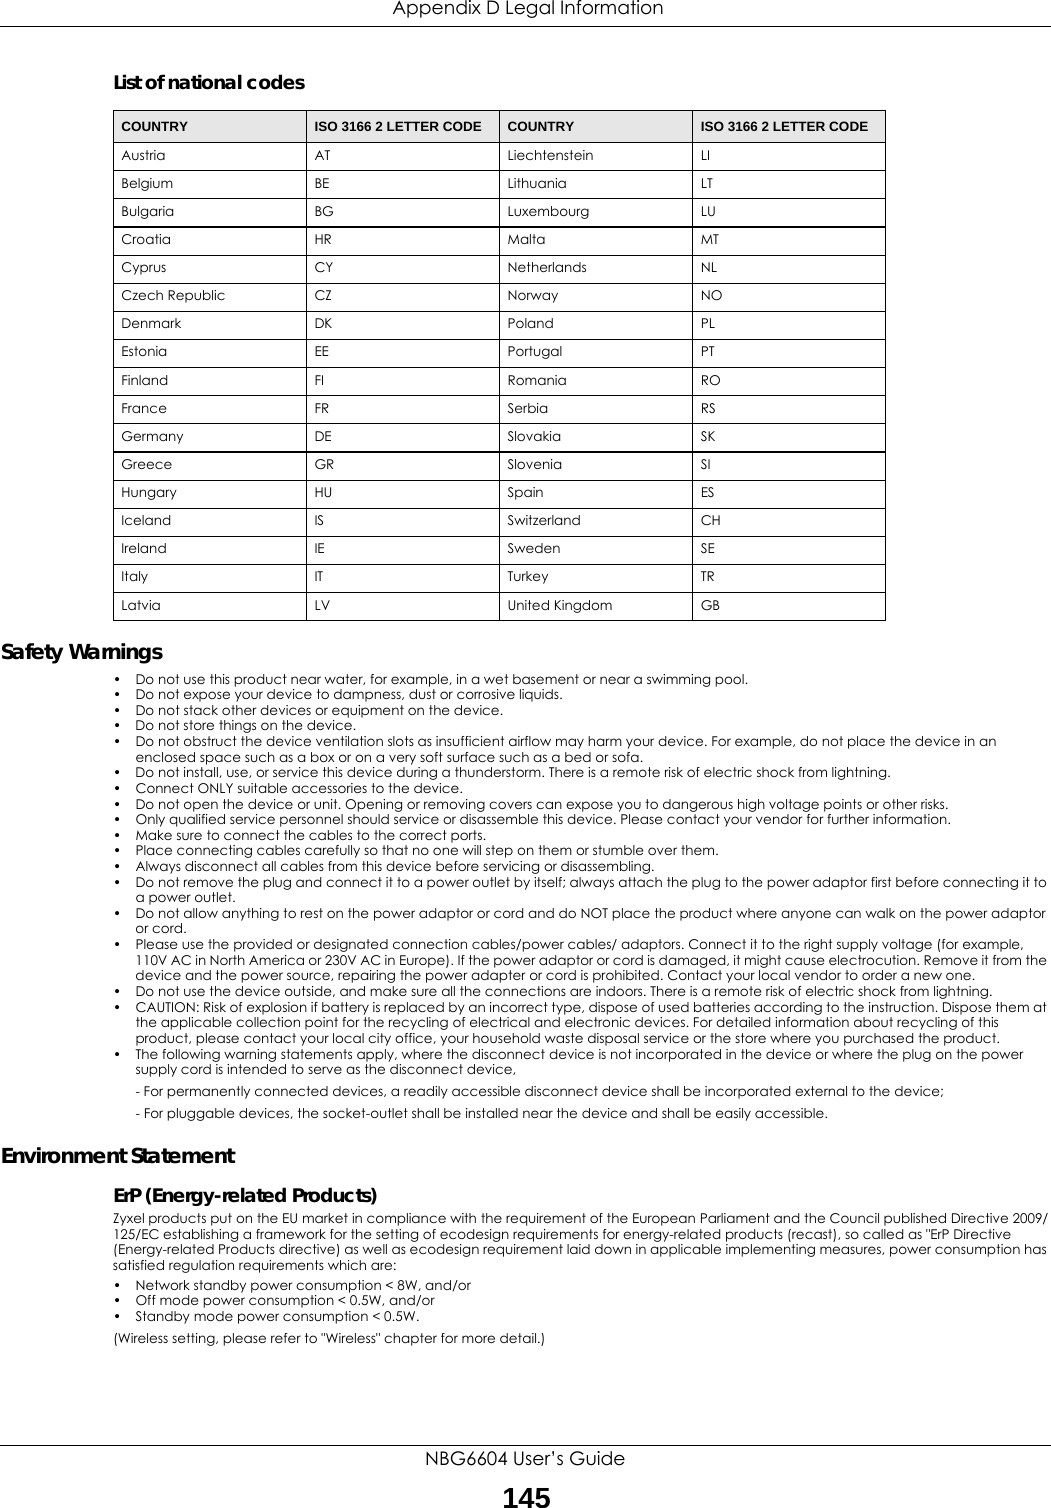  Appendix D Legal InformationNBG6604 User’s Guide145List of national codesSafety Warnings• Do not use this product near water, for example, in a wet basement or near a swimming pool.• Do not expose your device to dampness, dust or corrosive liquids.• Do not stack other devices or equipment on the device.• Do not store things on the device.• Do not obstruct the device ventilation slots as insufficient airflow may harm your device. For example, do not place the device in an enclosed space such as a box or on a very soft surface such as a bed or sofa.• Do not install, use, or service this device during a thunderstorm. There is a remote risk of electric shock from lightning.• Connect ONLY suitable accessories to the device.• Do not open the device or unit. Opening or removing covers can expose you to dangerous high voltage points or other risks. • Only qualified service personnel should service or disassemble this device. Please contact your vendor for further information.• Make sure to connect the cables to the correct ports.• Place connecting cables carefully so that no one will step on them or stumble over them.• Always disconnect all cables from this device before servicing or disassembling.• Do not remove the plug and connect it to a power outlet by itself; always attach the plug to the power adaptor first before connecting it to a power outlet.• Do not allow anything to rest on the power adaptor or cord and do NOT place the product where anyone can walk on the power adaptor or cord.• Please use the provided or designated connection cables/power cables/ adaptors. Connect it to the right supply voltage (for example, 110V AC in North America or 230V AC in Europe). If the power adaptor or cord is damaged, it might cause electrocution. Remove it from the device and the power source, repairing the power adapter or cord is prohibited. Contact your local vendor to order a new one.• Do not use the device outside, and make sure all the connections are indoors. There is a remote risk of electric shock from lightning.• CAUTION: Risk of explosion if battery is replaced by an incorrect type, dispose of used batteries according to the instruction. Dispose them at the applicable collection point for the recycling of electrical and electronic devices. For detailed information about recycling of this product, please contact your local city office, your household waste disposal service or the store where you purchased the product.• The following warning statements apply, where the disconnect device is not incorporated in the device or where the plug on the power supply cord is intended to serve as the disconnect device,- For permanently connected devices, a readily accessible disconnect device shall be incorporated external to the device;- For pluggable devices, the socket-outlet shall be installed near the device and shall be easily accessible.Environment StatementErP (Energy-related Products) Zyxel products put on the EU market in compliance with the requirement of the European Parliament and the Council published Directive 2009/125/EC establishing a framework for the setting of ecodesign requirements for energy-related products (recast), so called as &quot;ErP Directive (Energy-related Products directive) as well as ecodesign requirement laid down in applicable implementing measures, power consumption has satisfied regulation requirements which are:• Network standby power consumption &lt; 8W, and/or• Off mode power consumption &lt; 0.5W, and/or• Standby mode power consumption &lt; 0.5W.(Wireless setting, please refer to &quot;Wireless&quot; chapter for more detail.)COUNTRY ISO 3166 2 LETTER CODE COUNTRY ISO 3166 2 LETTER CODEAustria AT Liechtenstein LIBelgium BE Lithuania LTBulgaria BG Luxembourg LUCroatia HR Malta MTCyprus CY Netherlands NLCzech Republic CZ Norway NODenmark DK Poland PLEstonia EE Portugal PTFinland FI Romania ROFrance FR Serbia RSGermany DE Slovakia SKGreece GR Slovenia SIHungary HU Spain ESIceland IS Switzerland CHIreland IE Sweden SEItaly IT Turkey TRLatvia LV United Kingdom GB